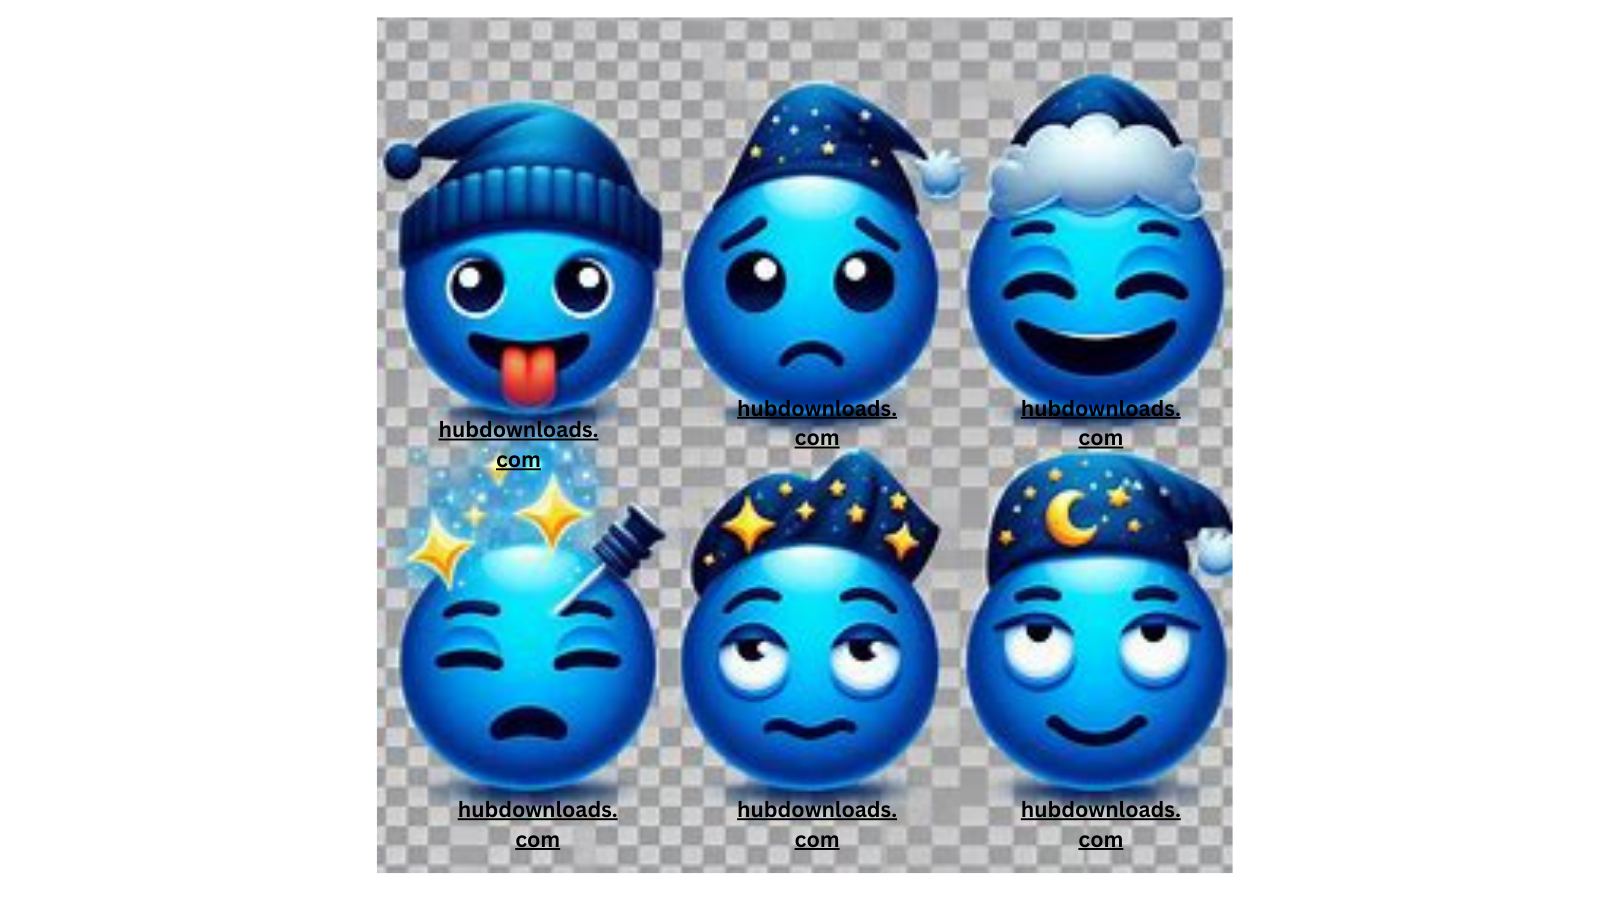 (Alt Text for Image): A collage of six blue emojis with various expressions, including happy, sad, sleepy, dizzy, and yawning. These emojis are part of a bundle pack for digital planners and social media use.